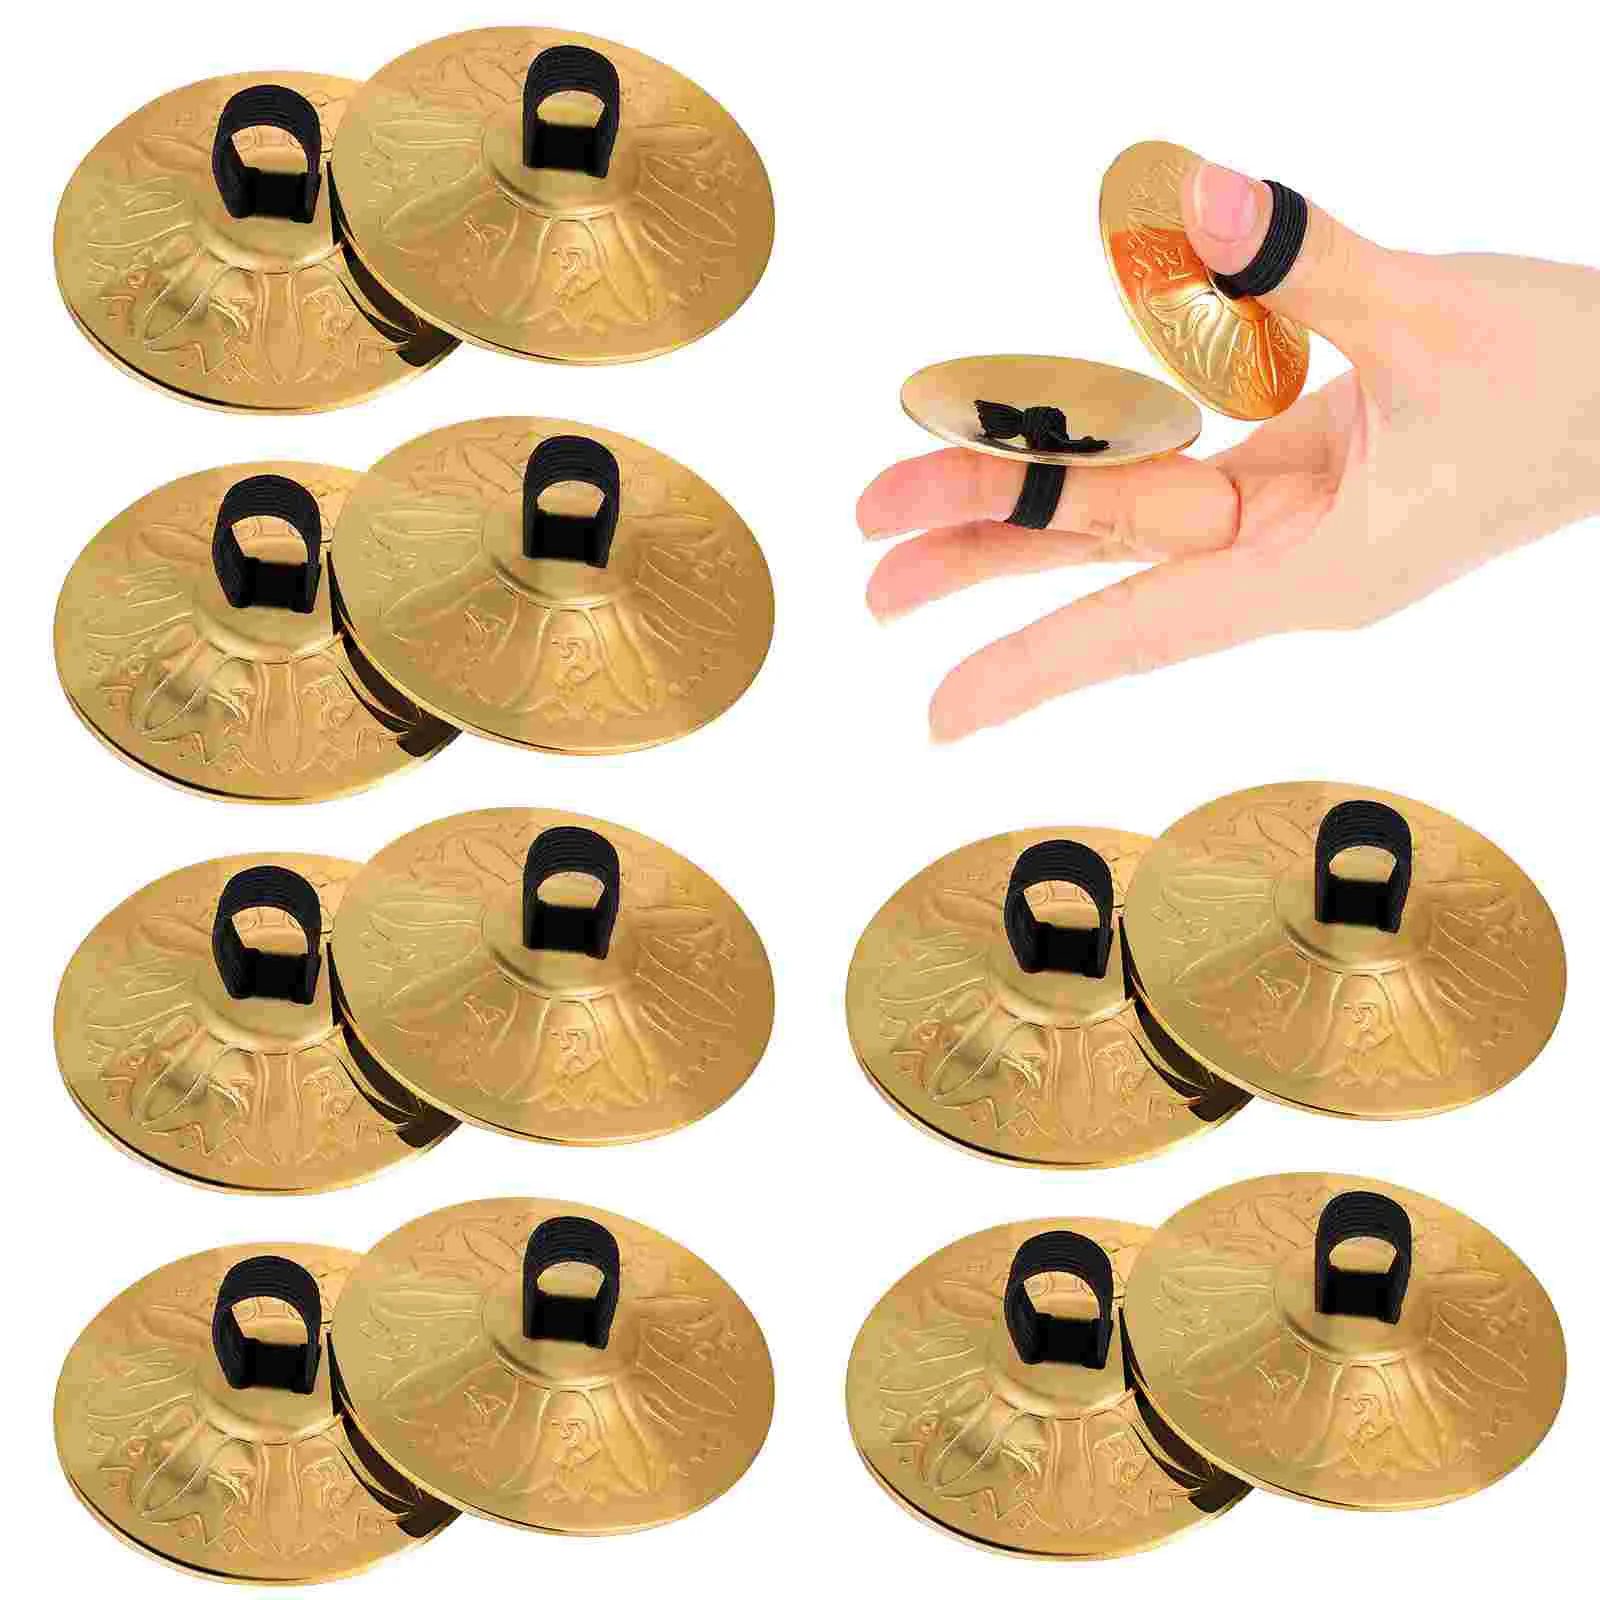 Cymbals Finger Belly Dance Tibetan Instrument Cymbal Percussion Zills Musical Dancing Hand Chimes Thumb Bell Chime Meditation